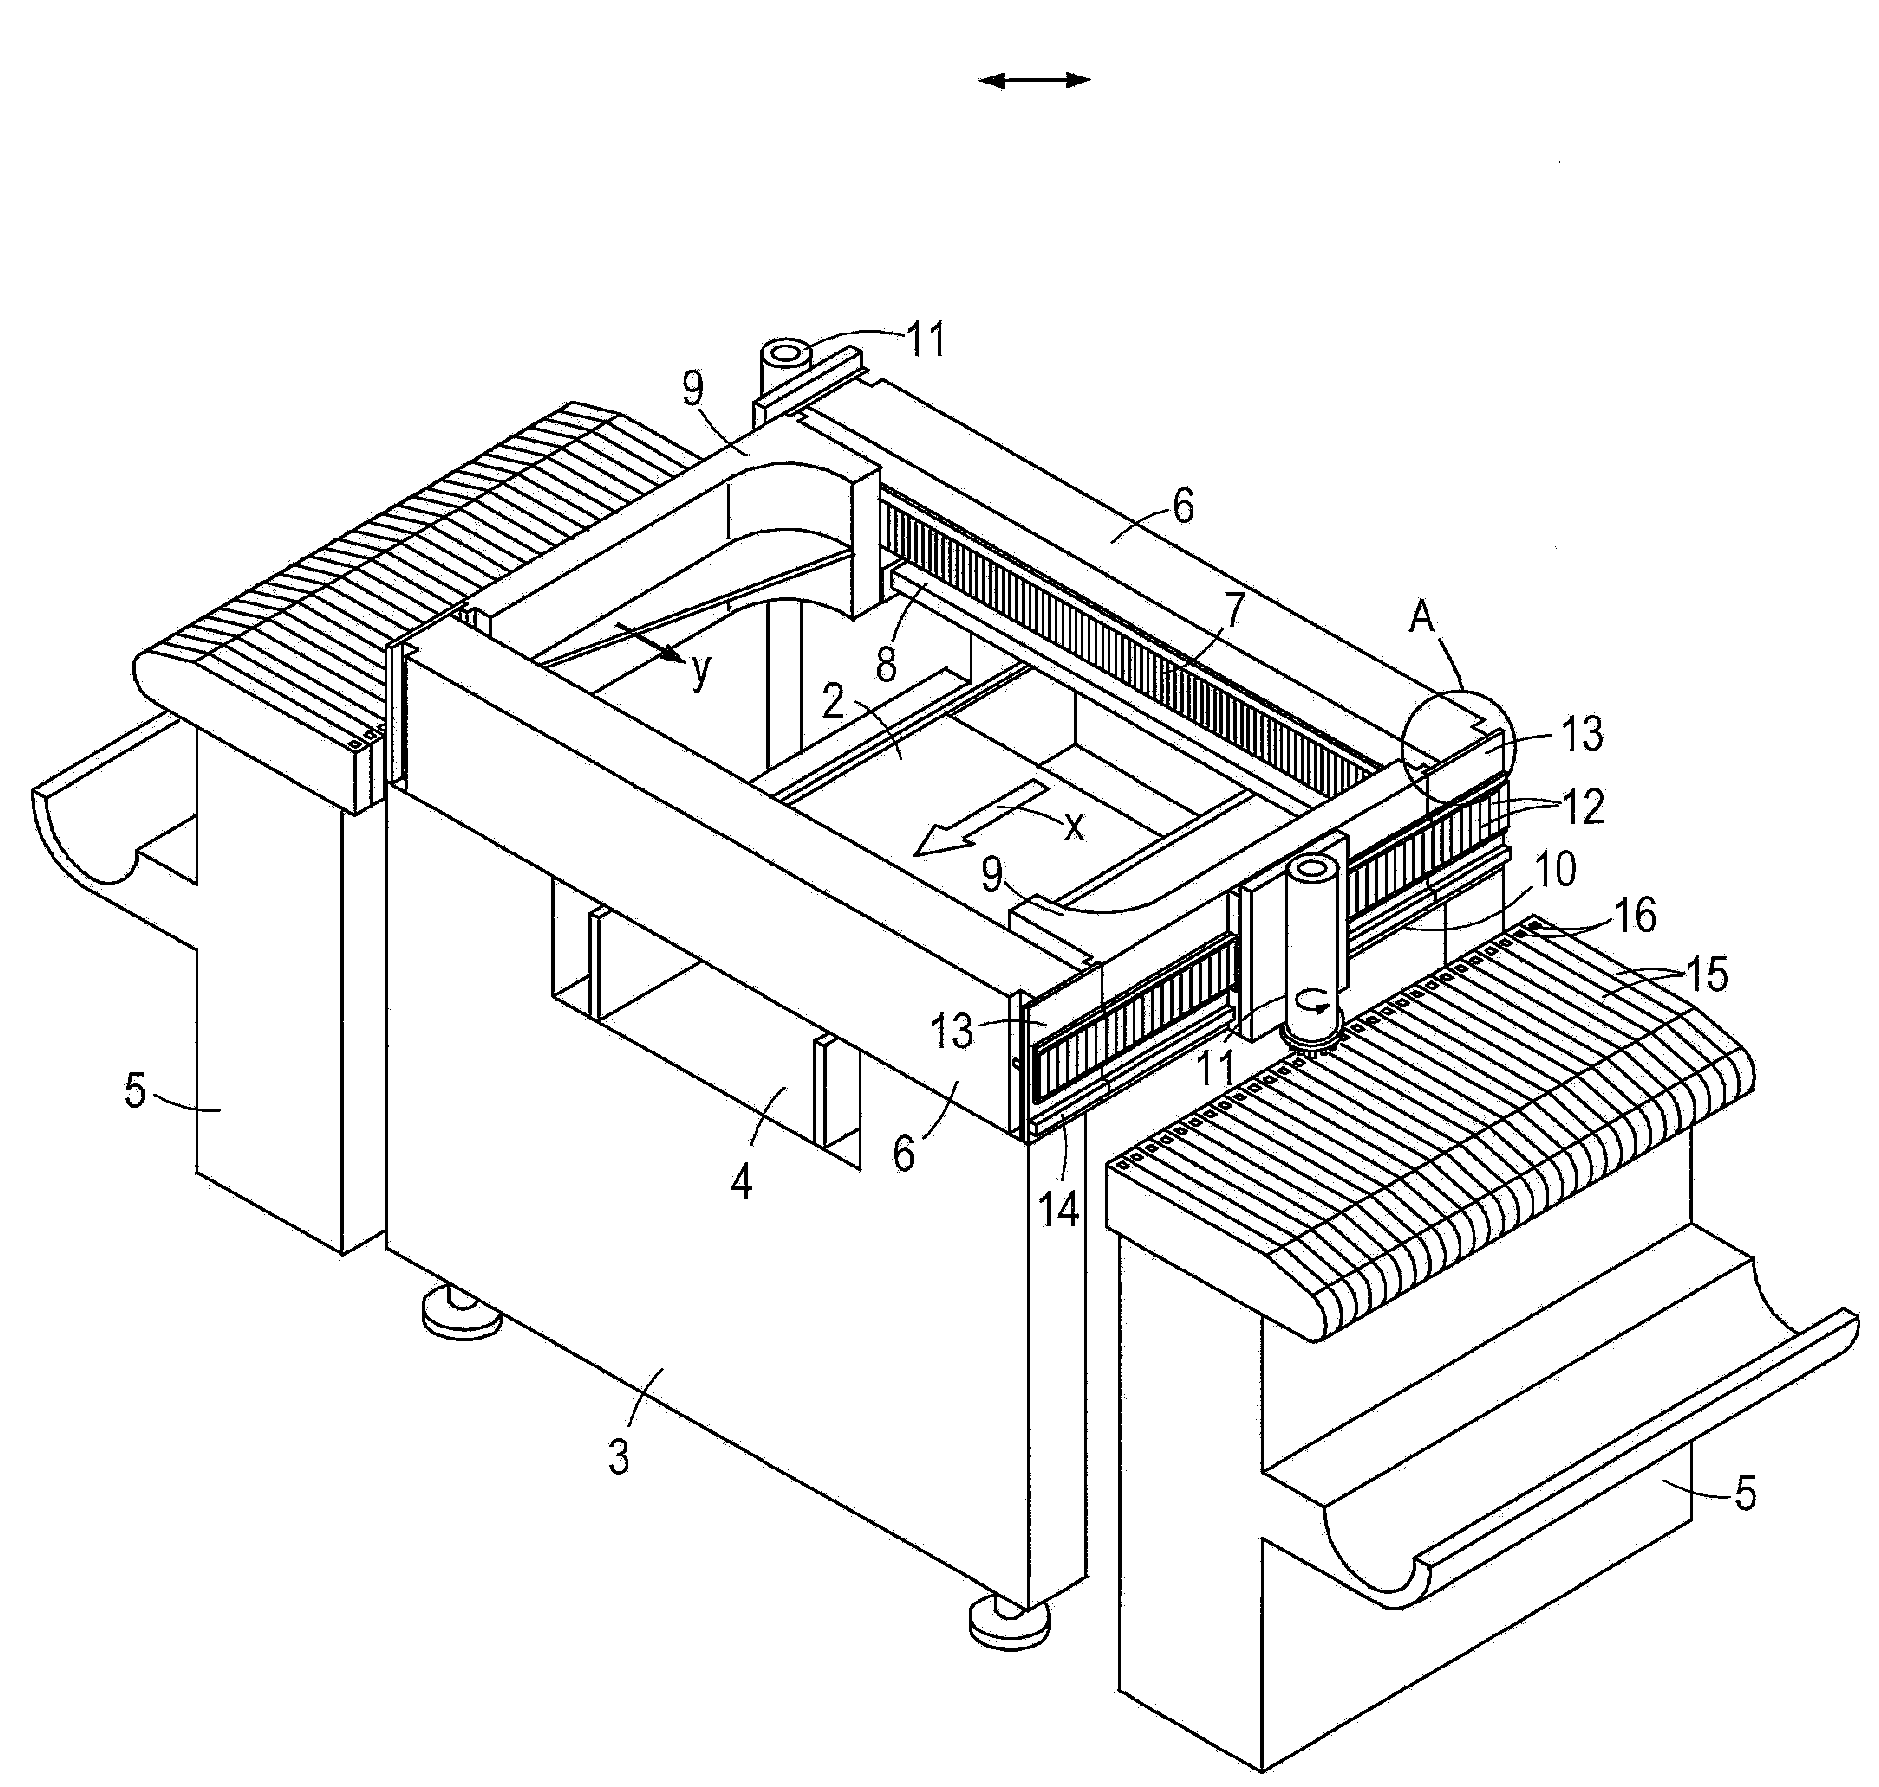 Device for fitting electrical component on substrate